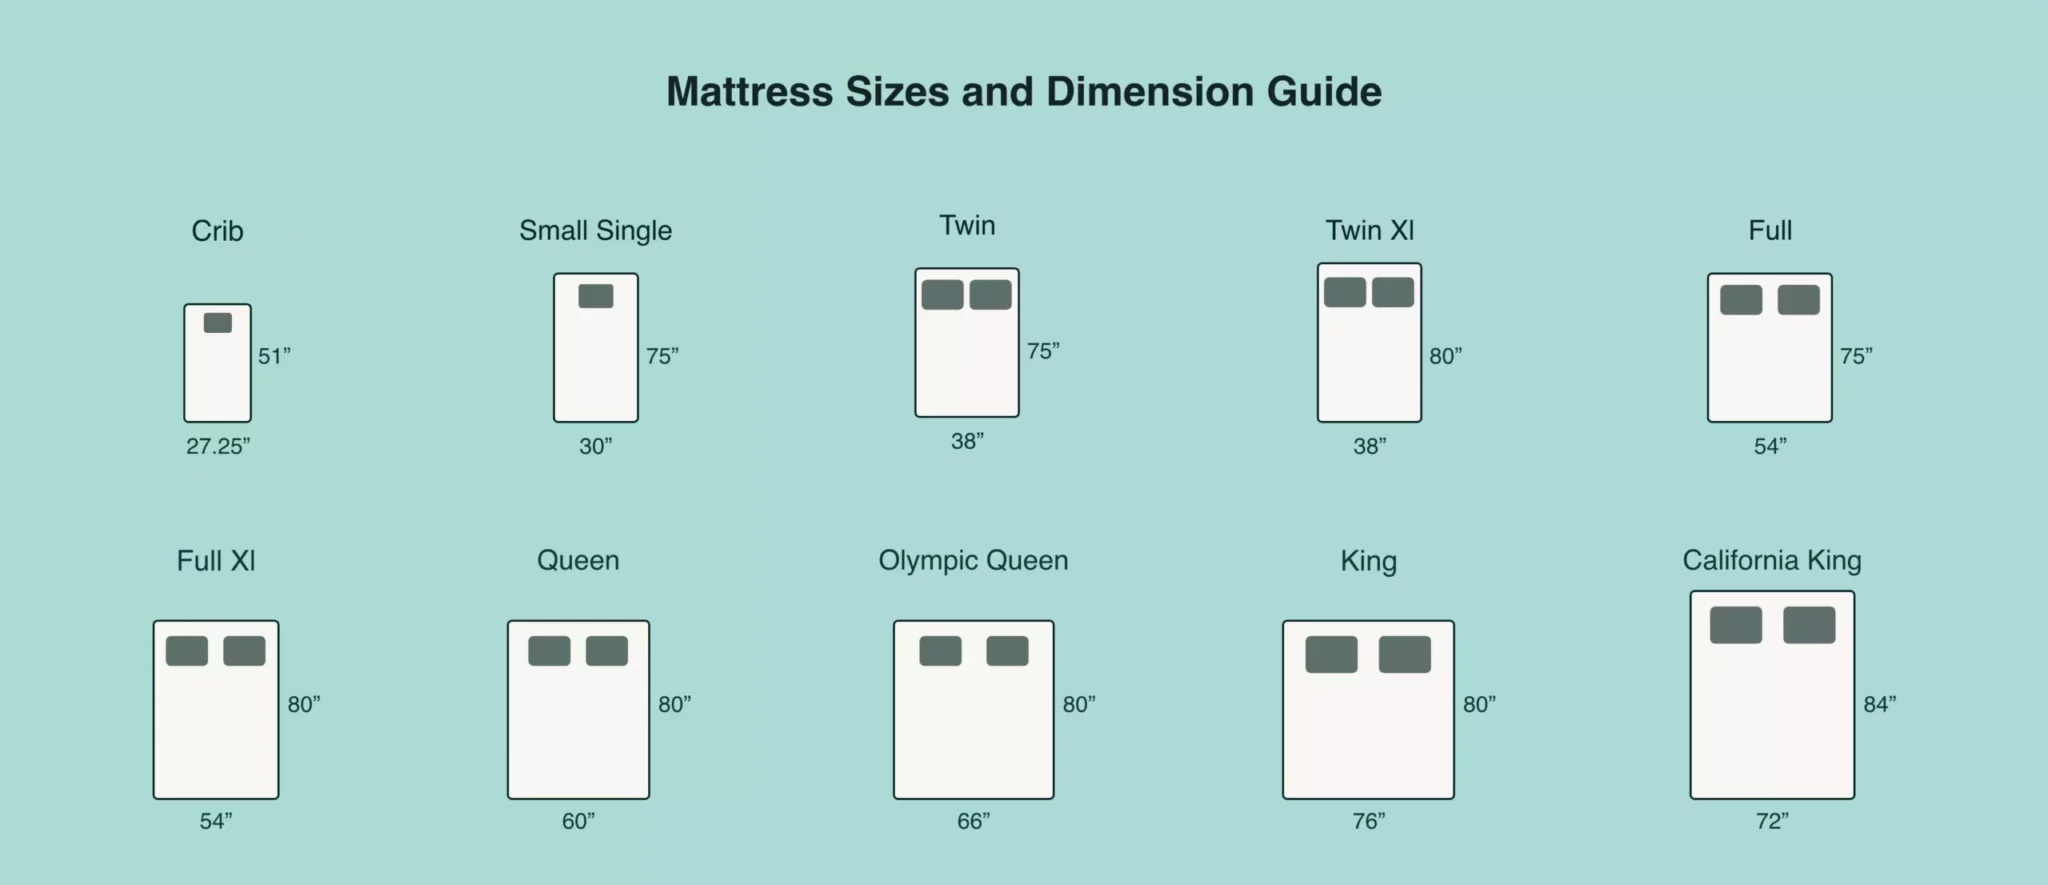 Mattress Sizes Chart And Bed Dimensions Guide